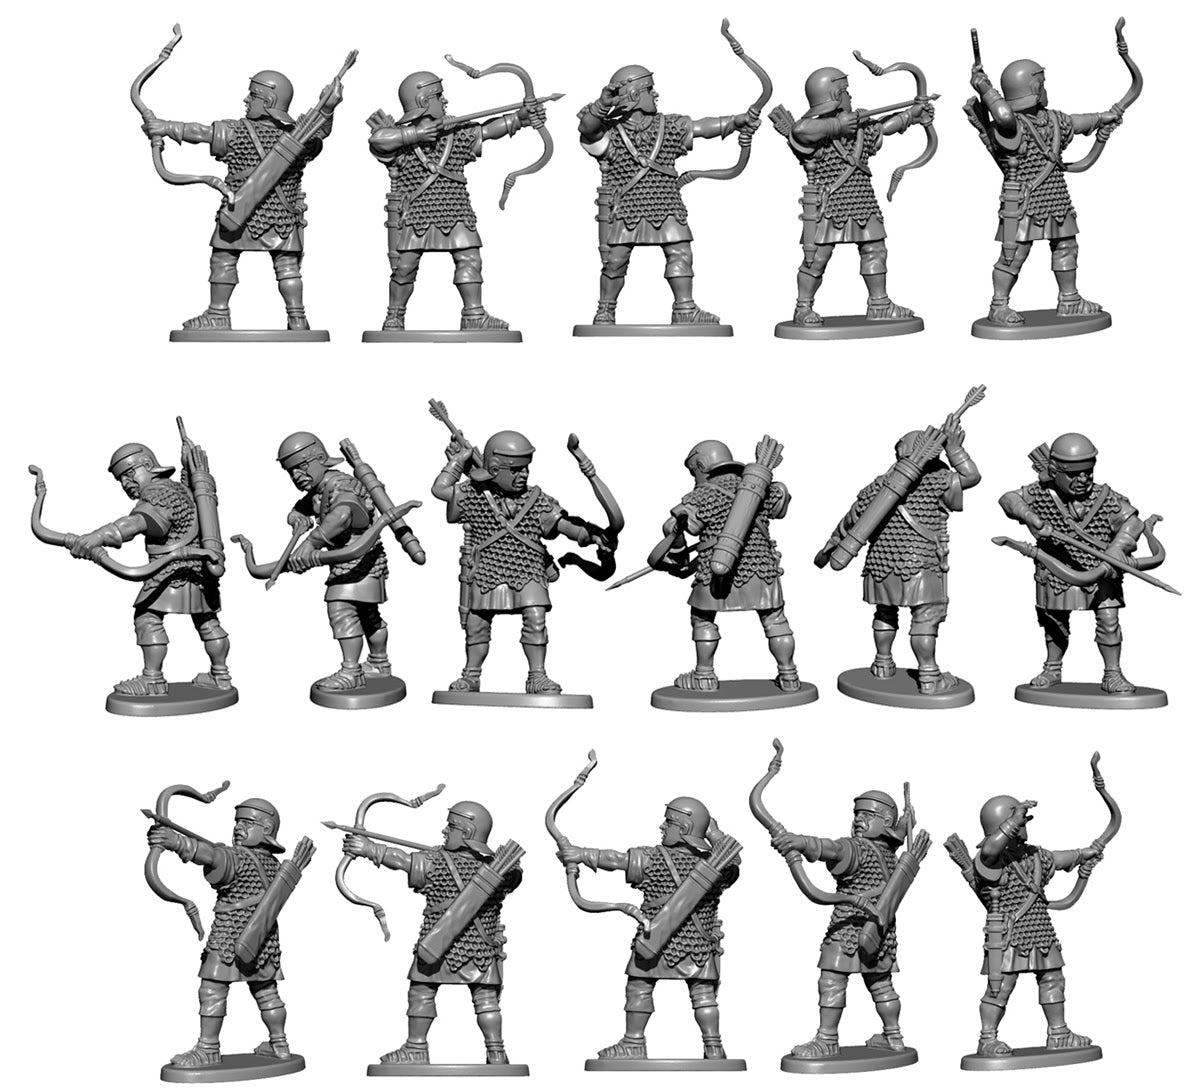 Upcoming Release: Roman Archers